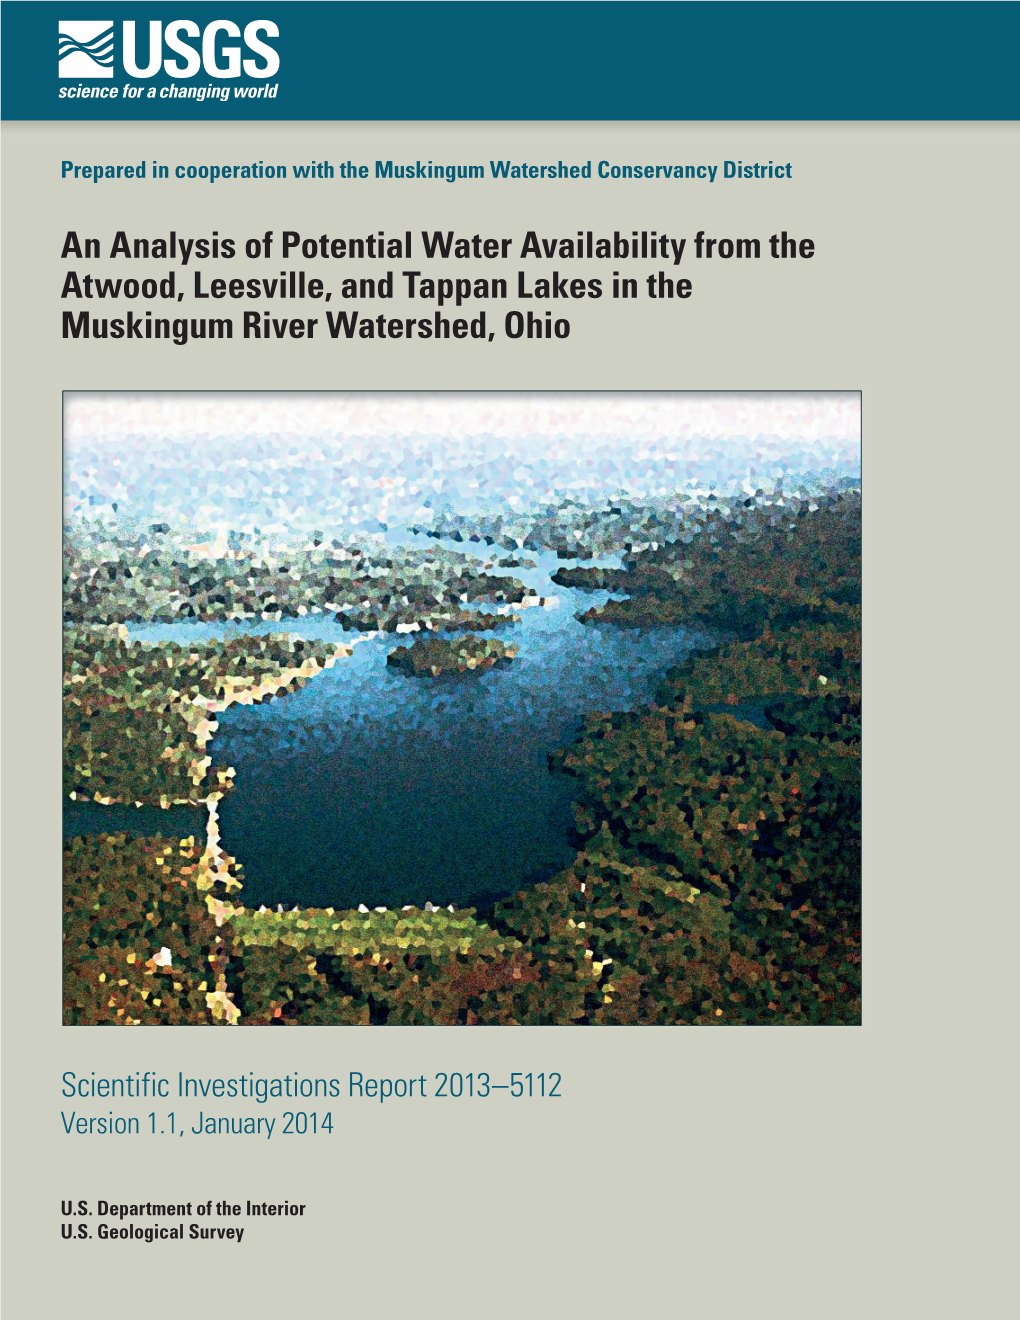 An Analysis of Potential Water Availability from the Atwood, Leesville, and Tappan Lakes in the Muskingum River Watershed, Ohio